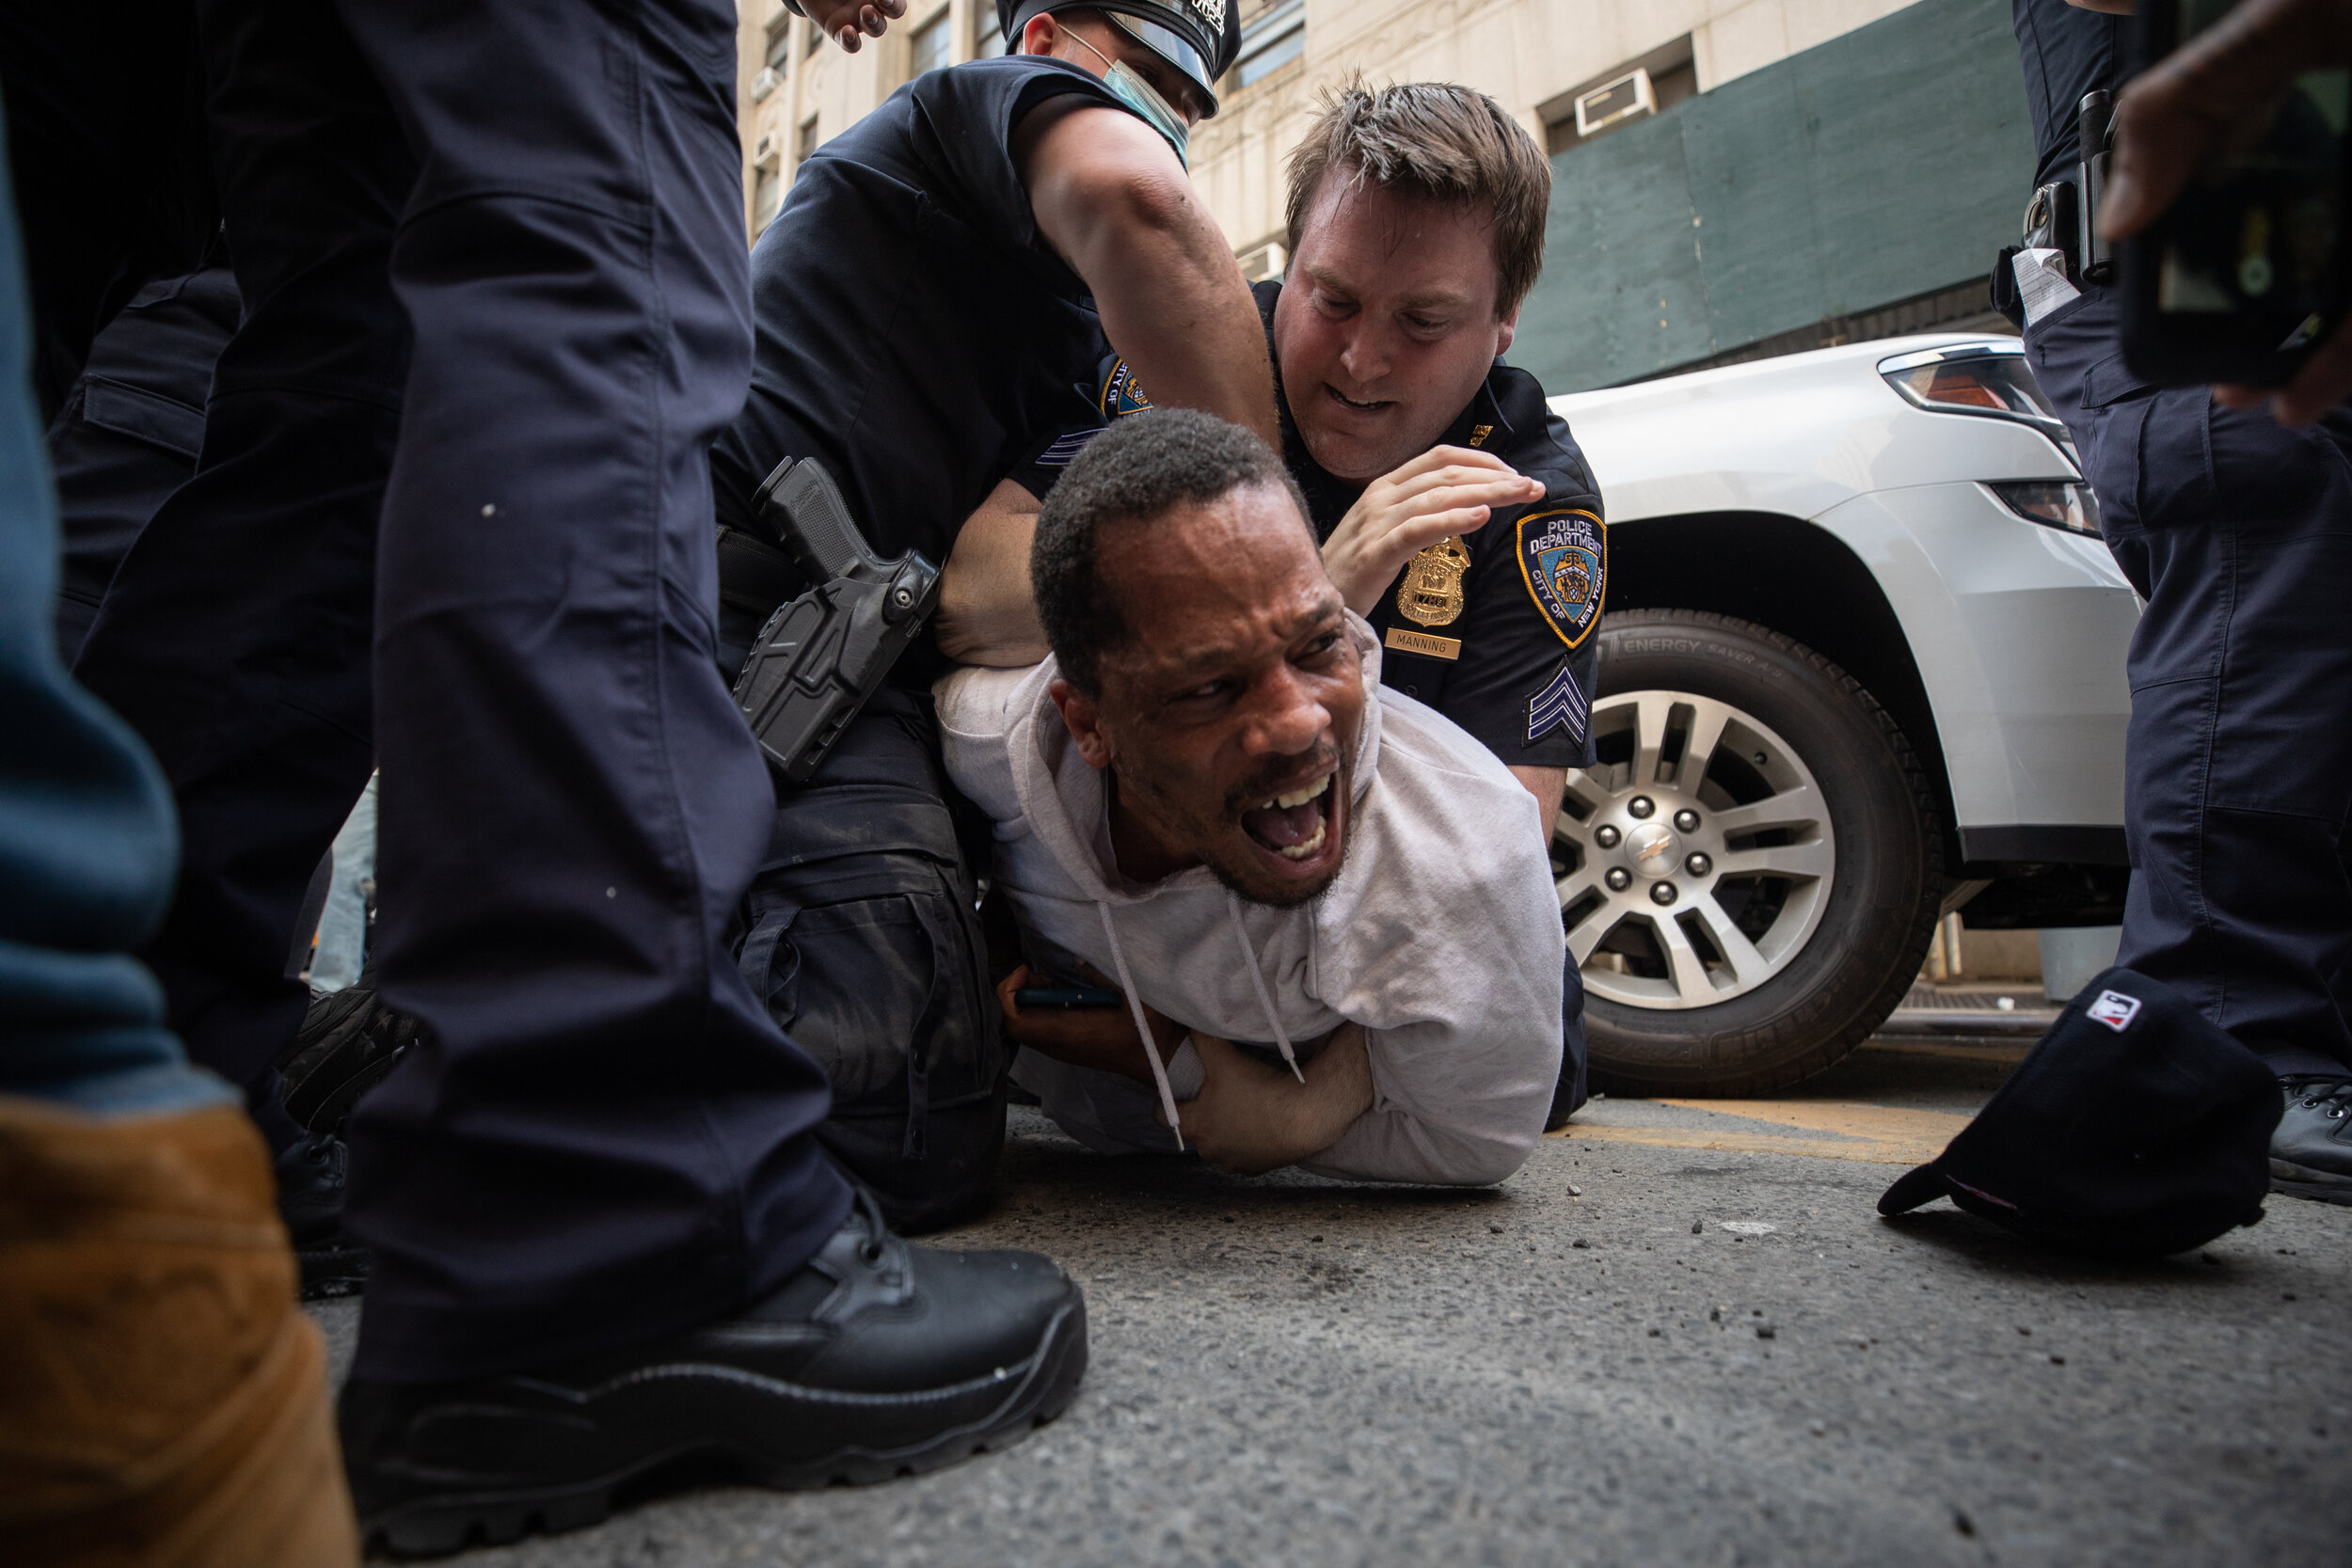  A man is arrested in Manhattan during a protest after the killing of George Floyd by Minneapolis Police officer Derek Chauvin.  